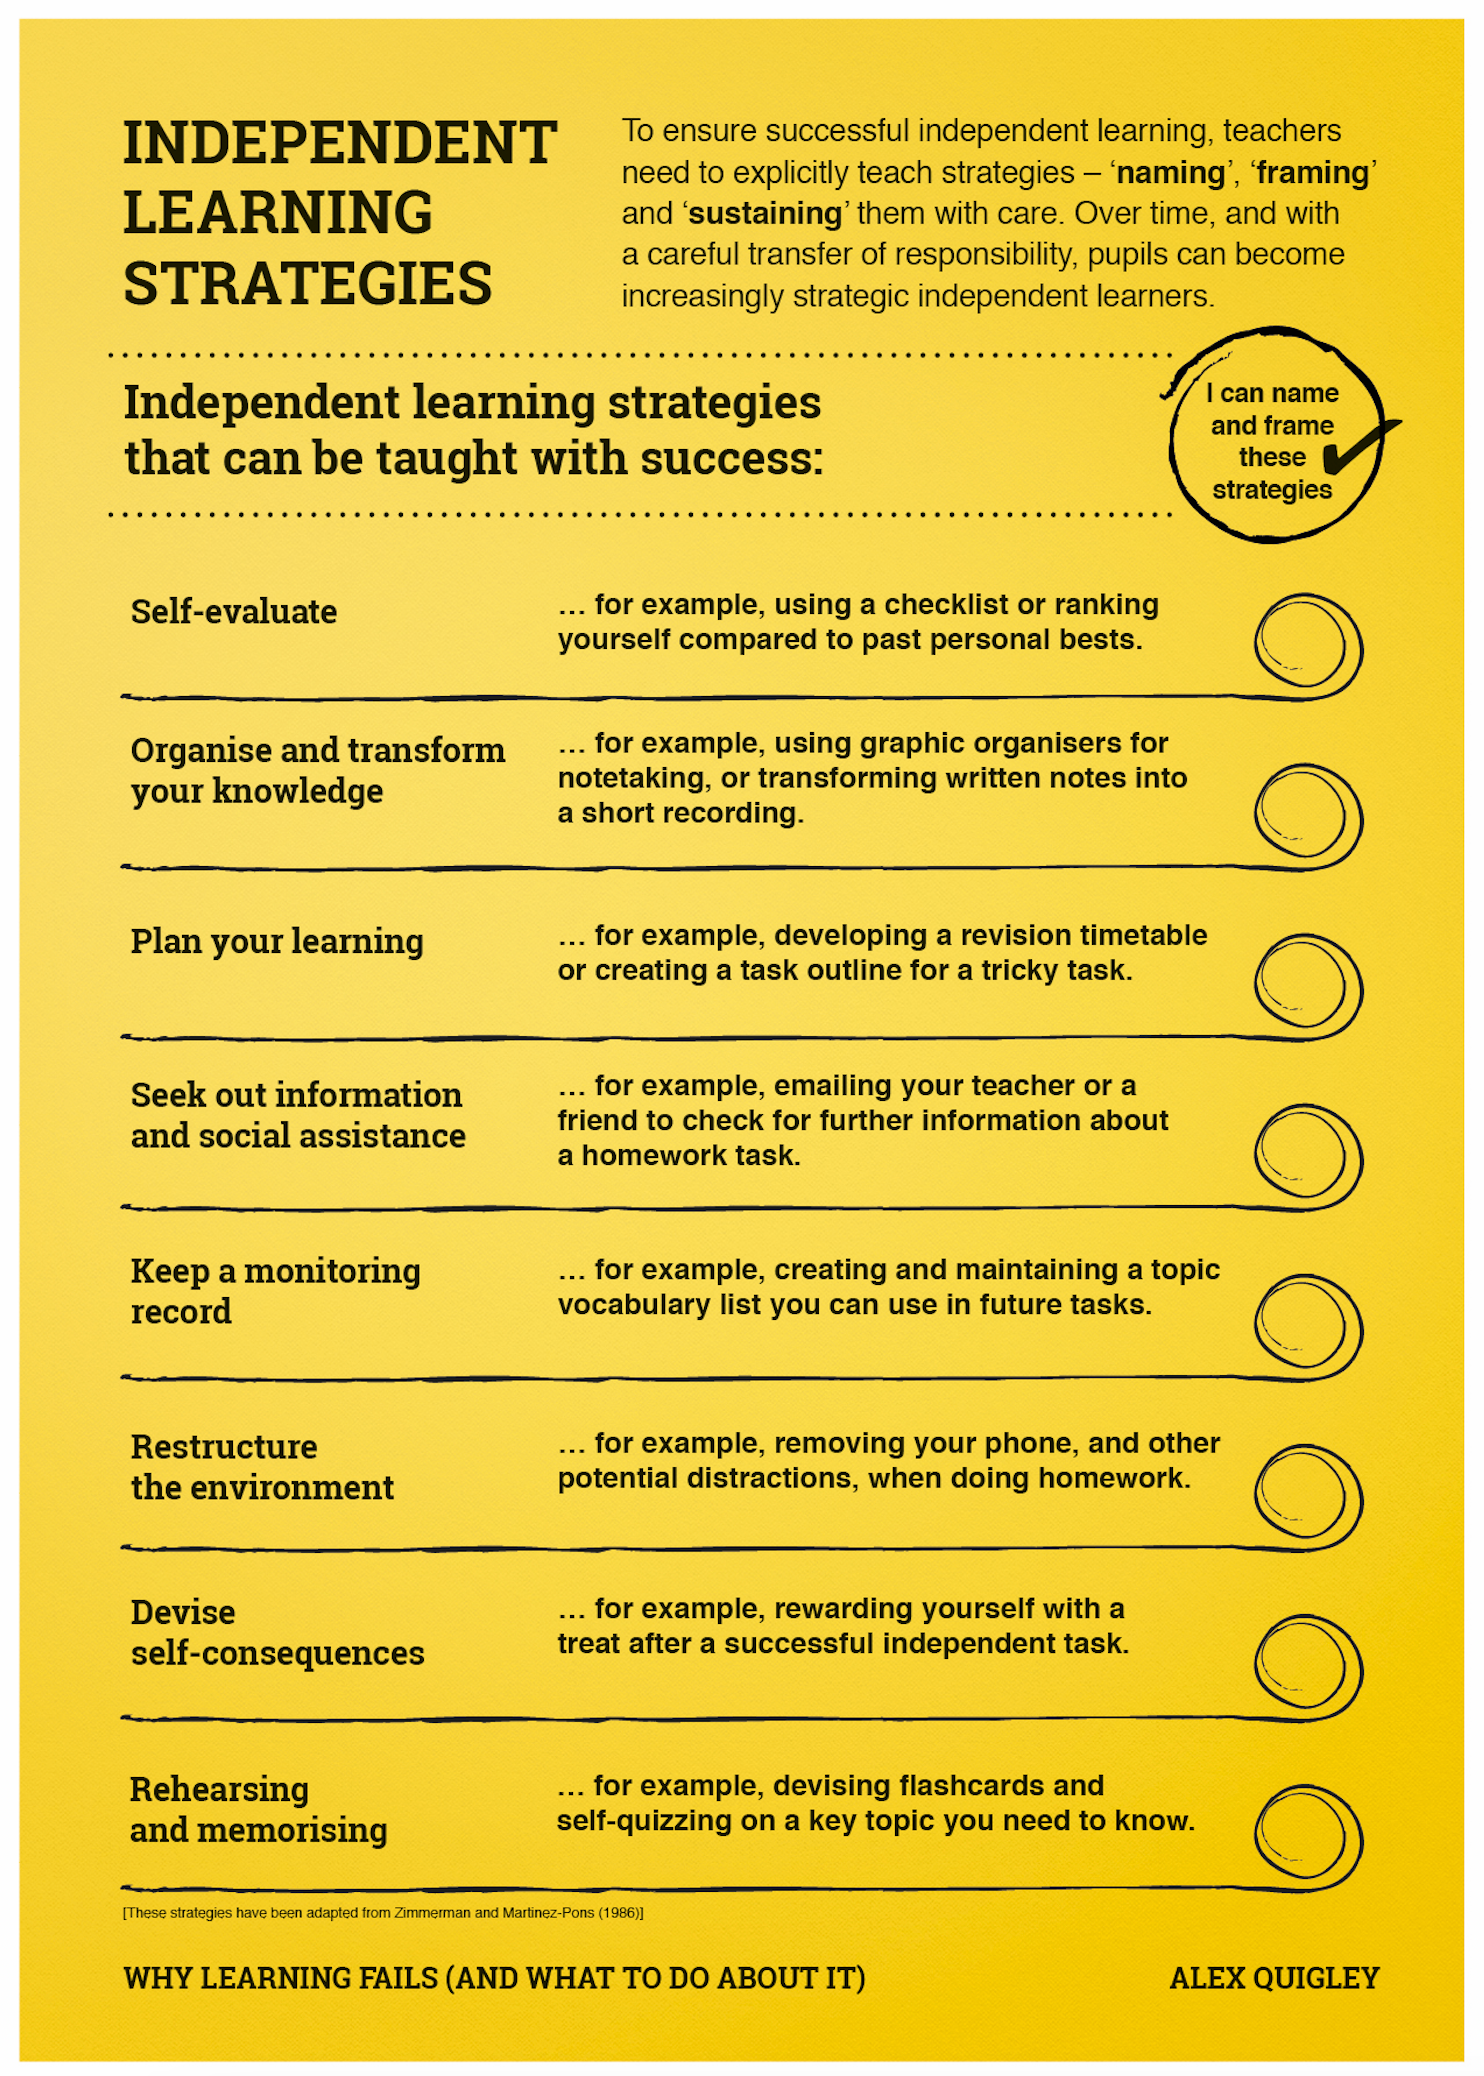 Improving Independent Learning